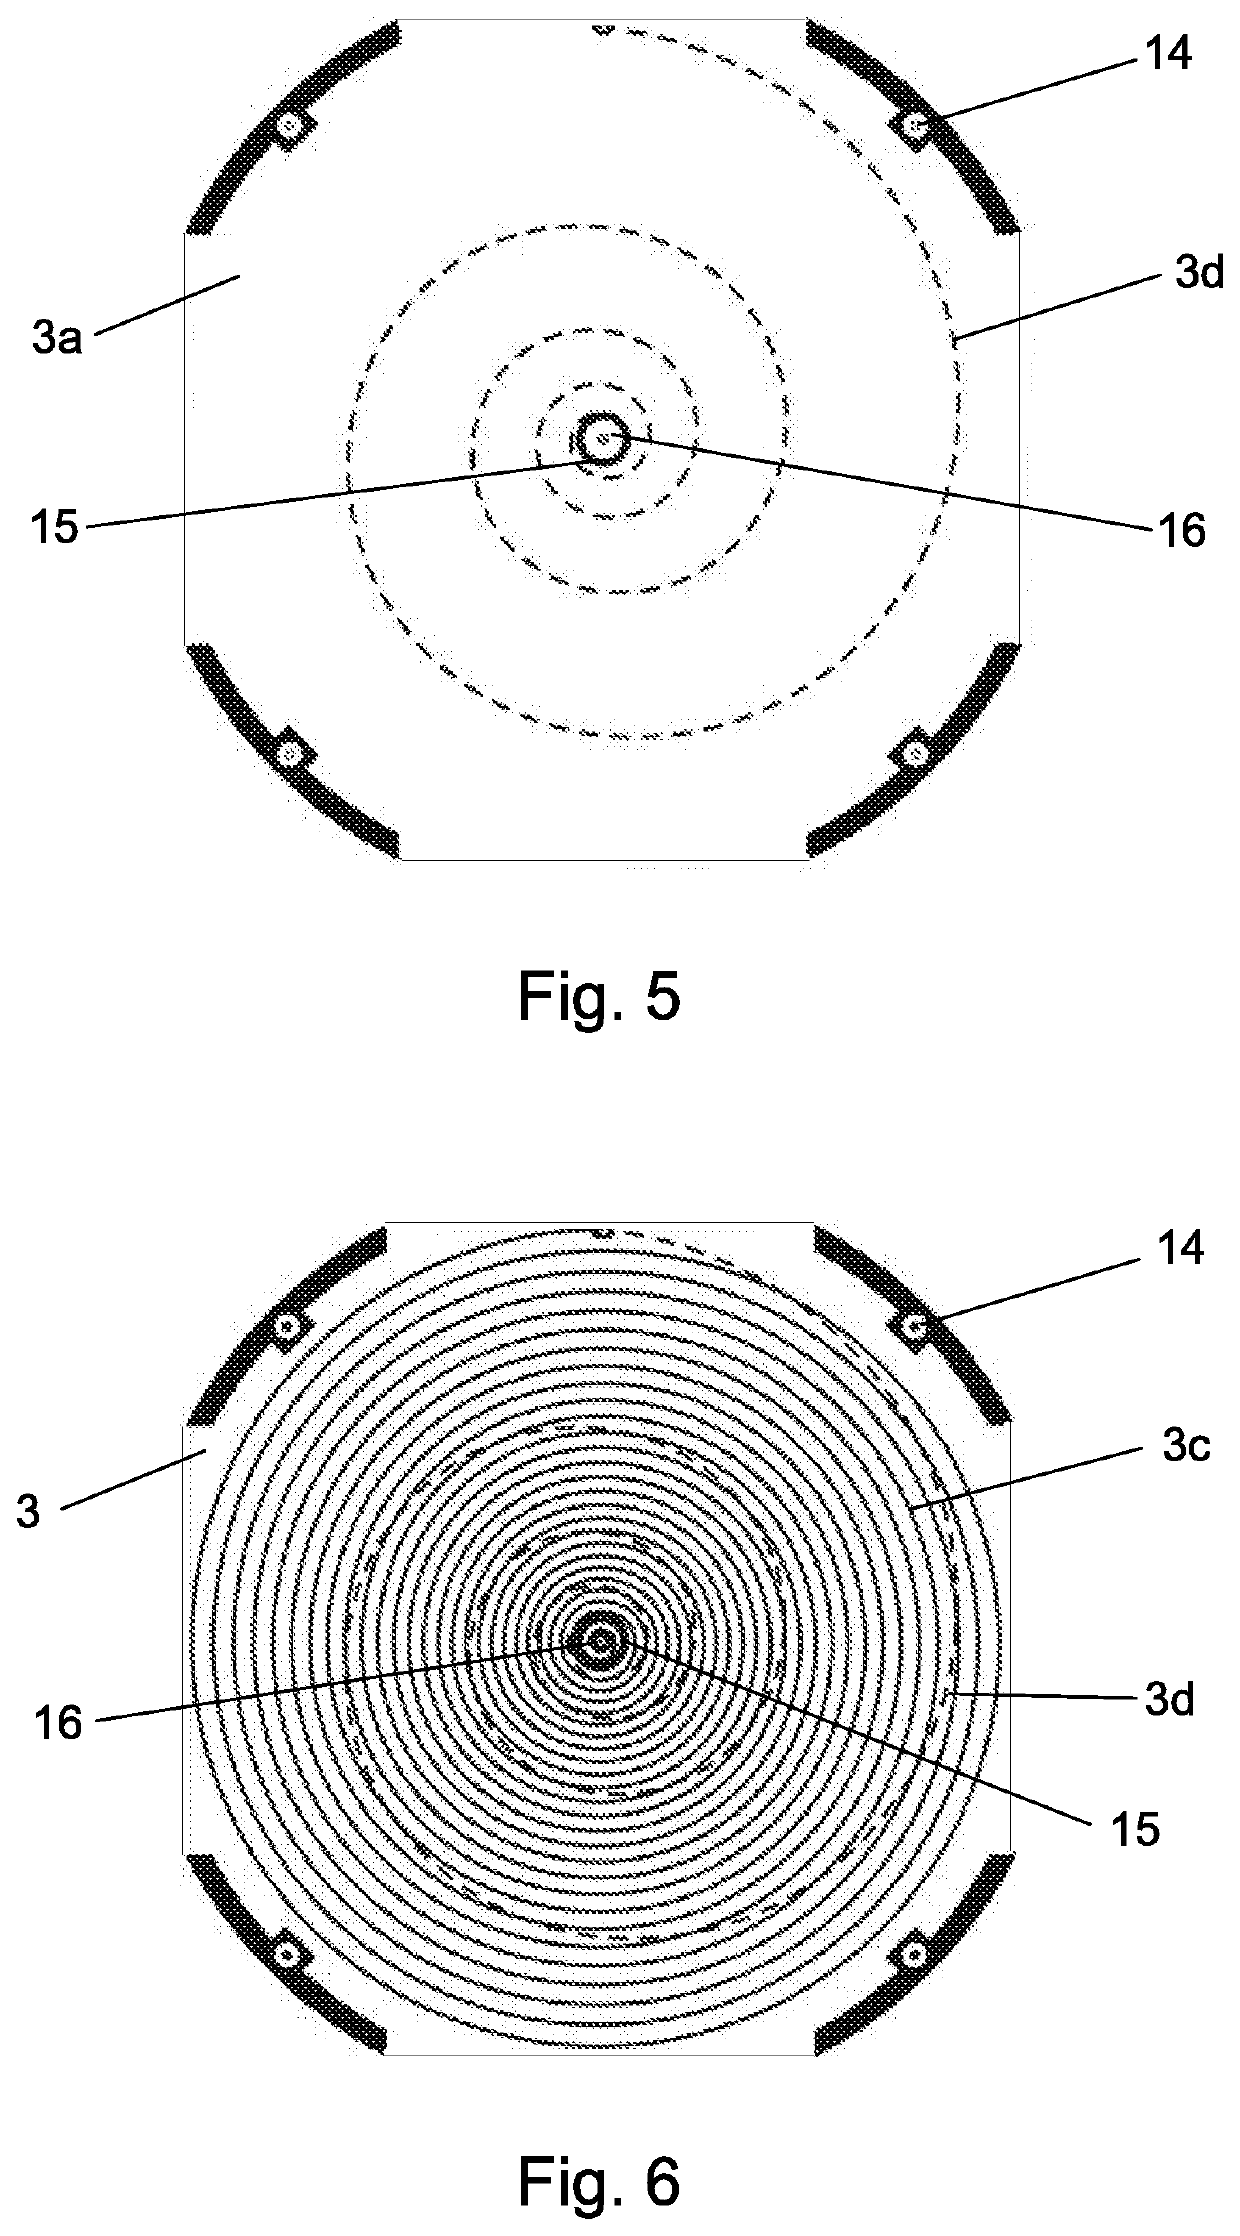 Method for Reducing the Amount of Ambient Radio Frequency Electromagnetic and Pulsating Magnetic Fields, Method for Drying Wet Walls, and Using the Device for Drying Wet Walls